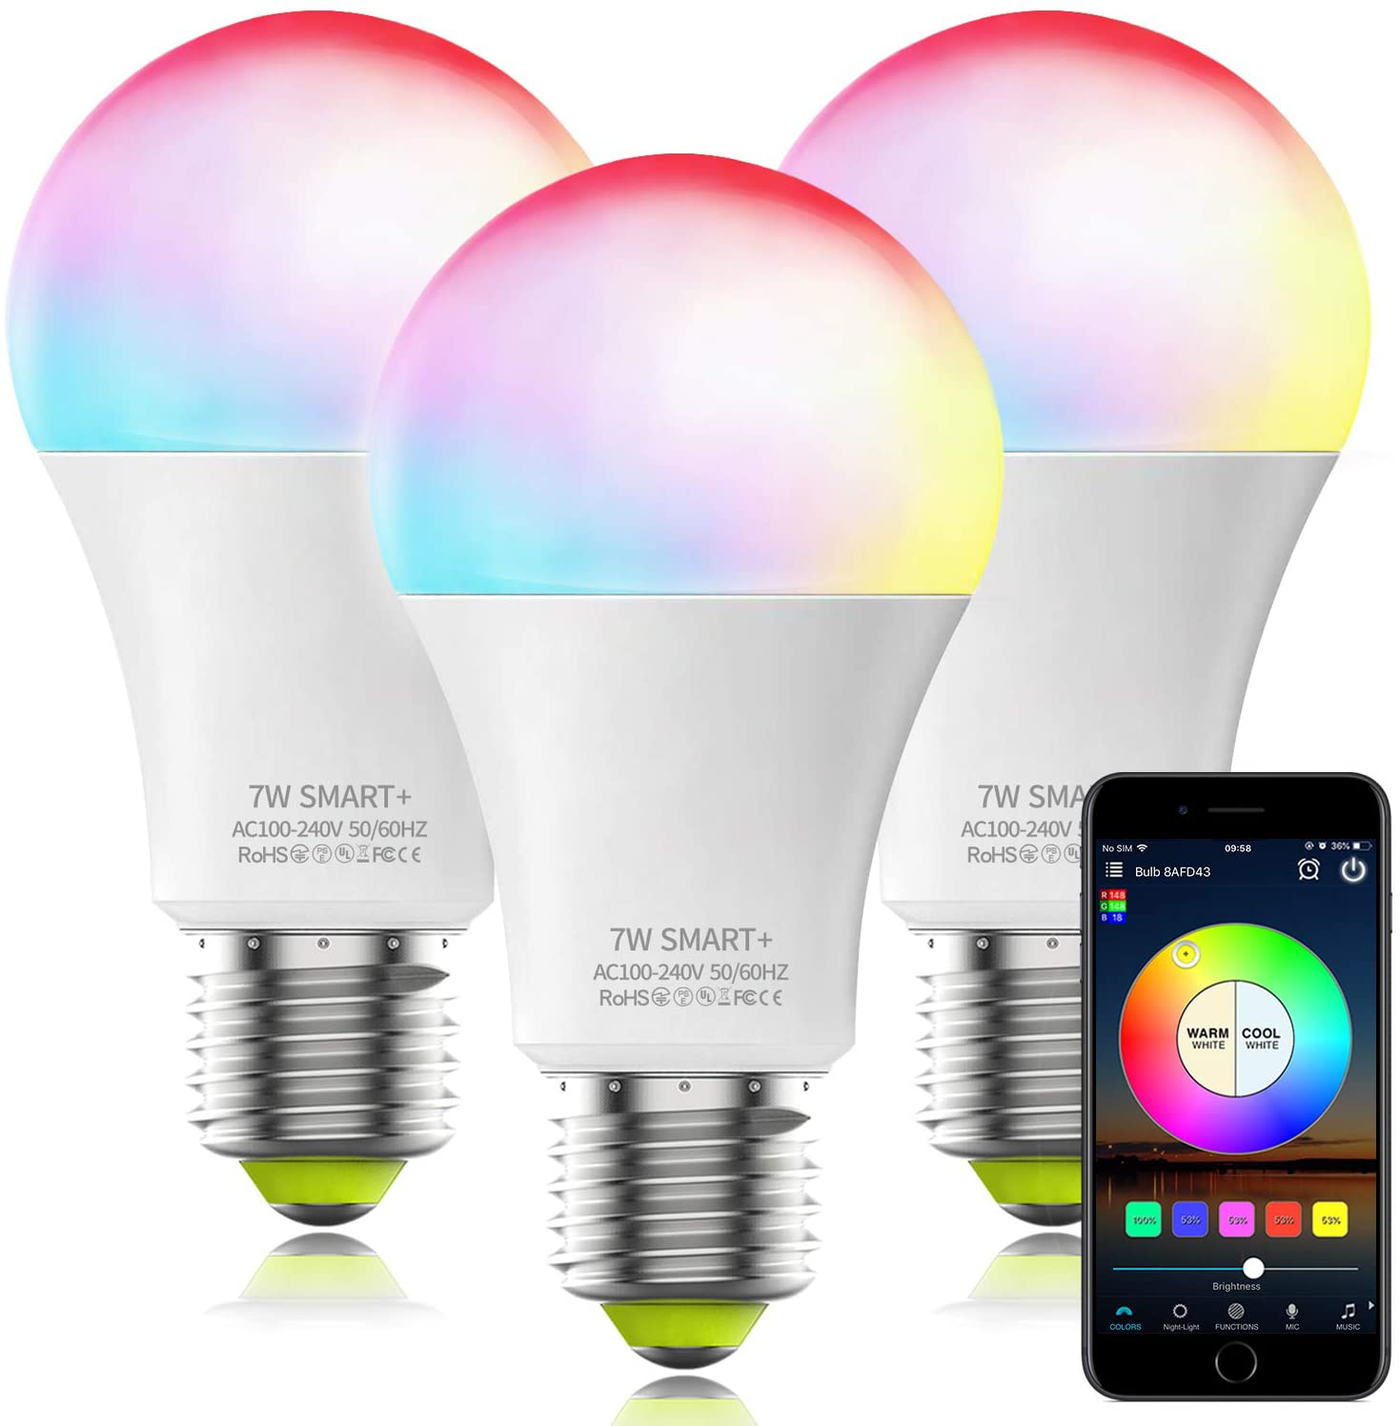 WiFi Smart Light Bulb, A19 E26 60W Equivalent Tunable White Color Changing Smart LED Light Bulb, UL Certified, Works with Alexa Google Home, No Hub Required